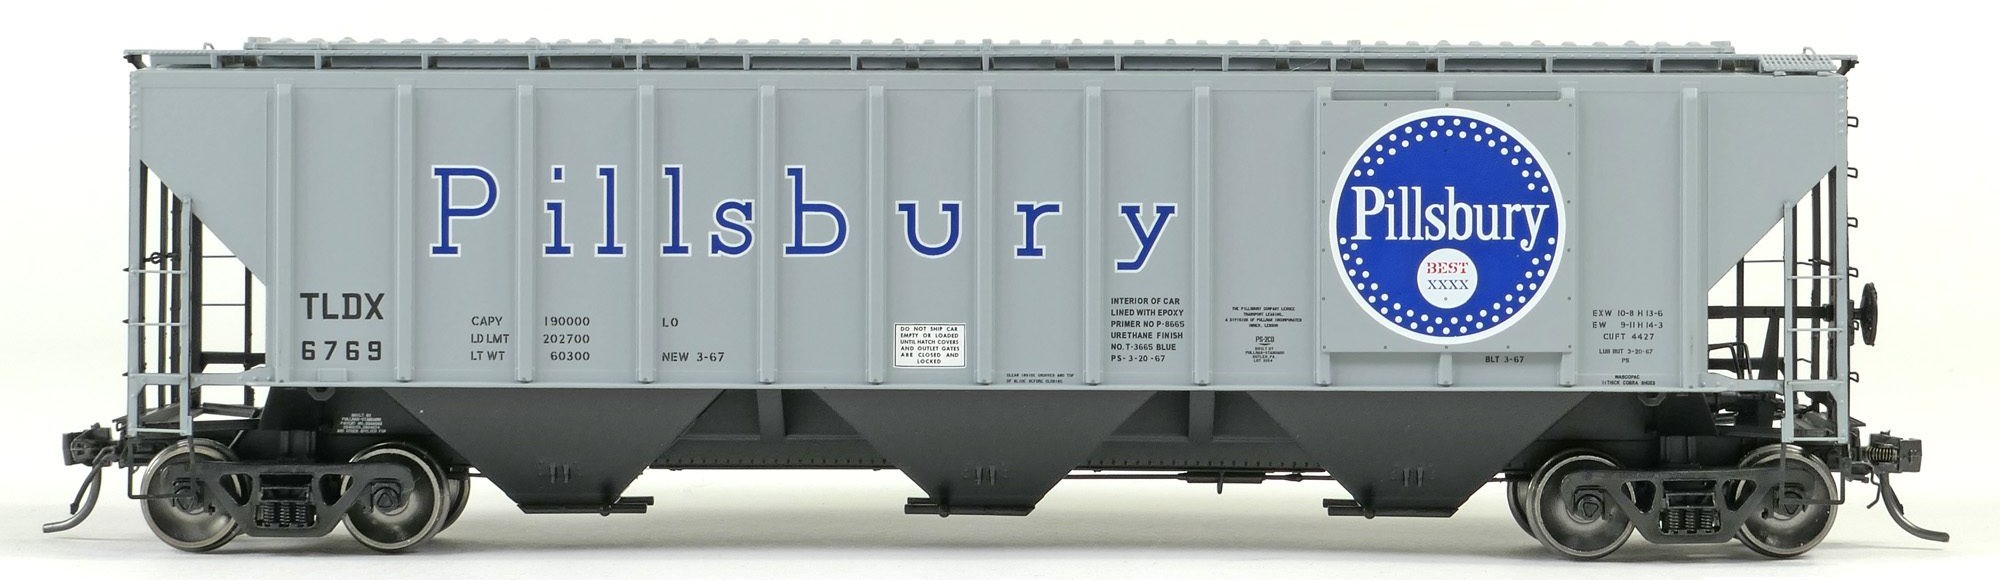 Tangent Scale Models HO 21040-03 Pullman-Standard PS-2 4427 High Side Covered Hopper TLDX 'Delivery Pillsbury 3-1967' TLDX #6766